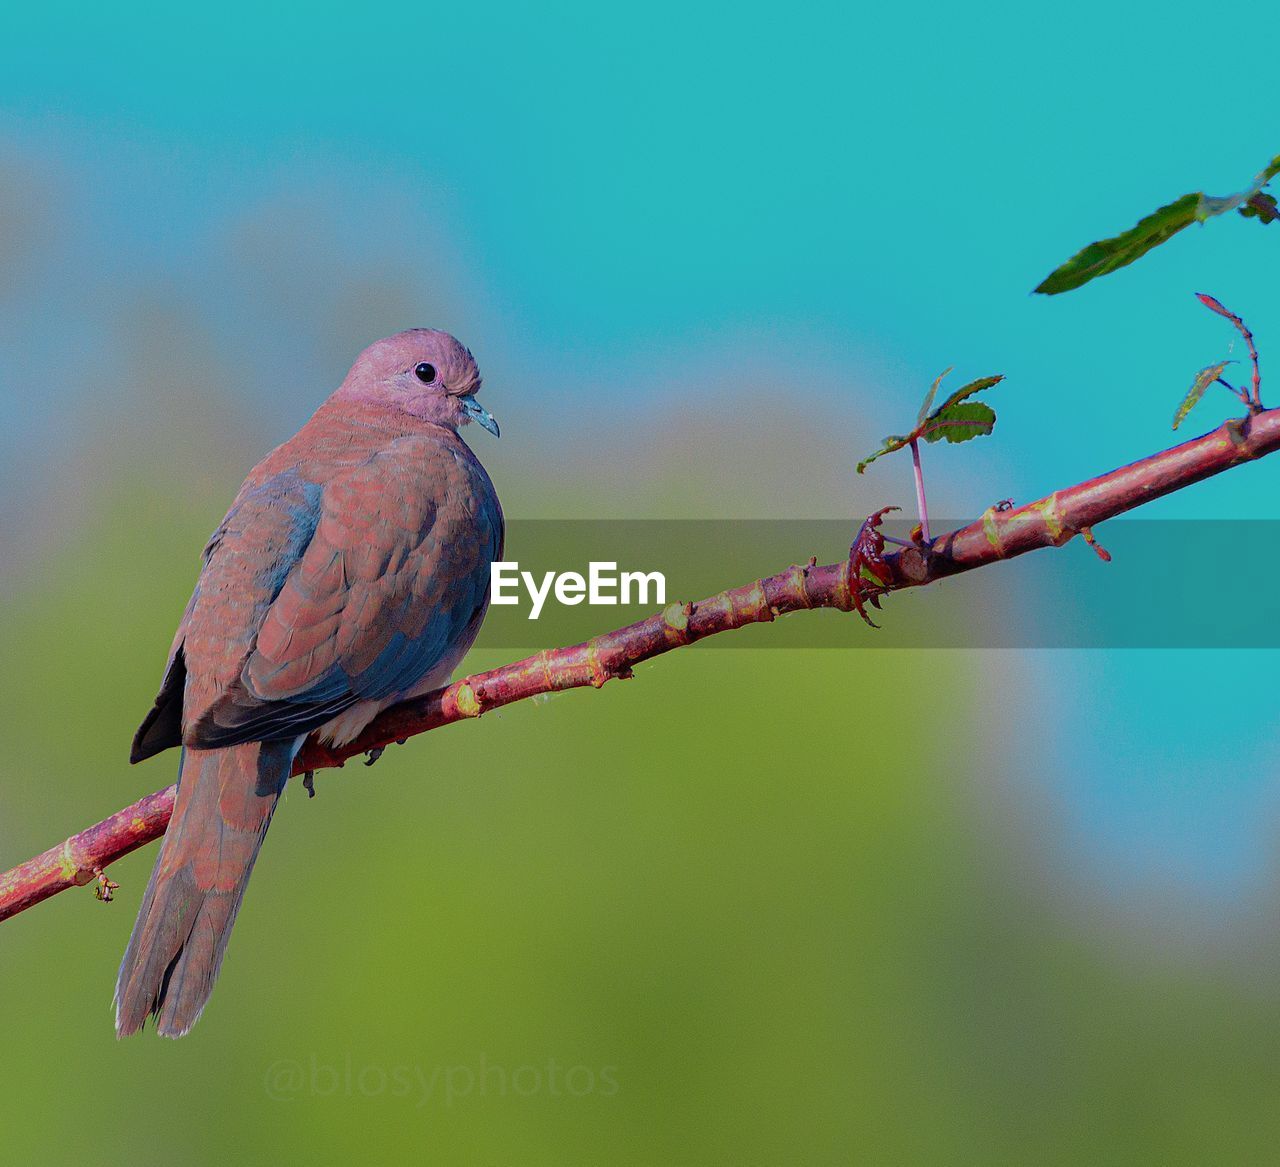 CLOSE-UP OF BIRD PERCHING ON BRANCH AGAINST BLURRED BACKGROUND